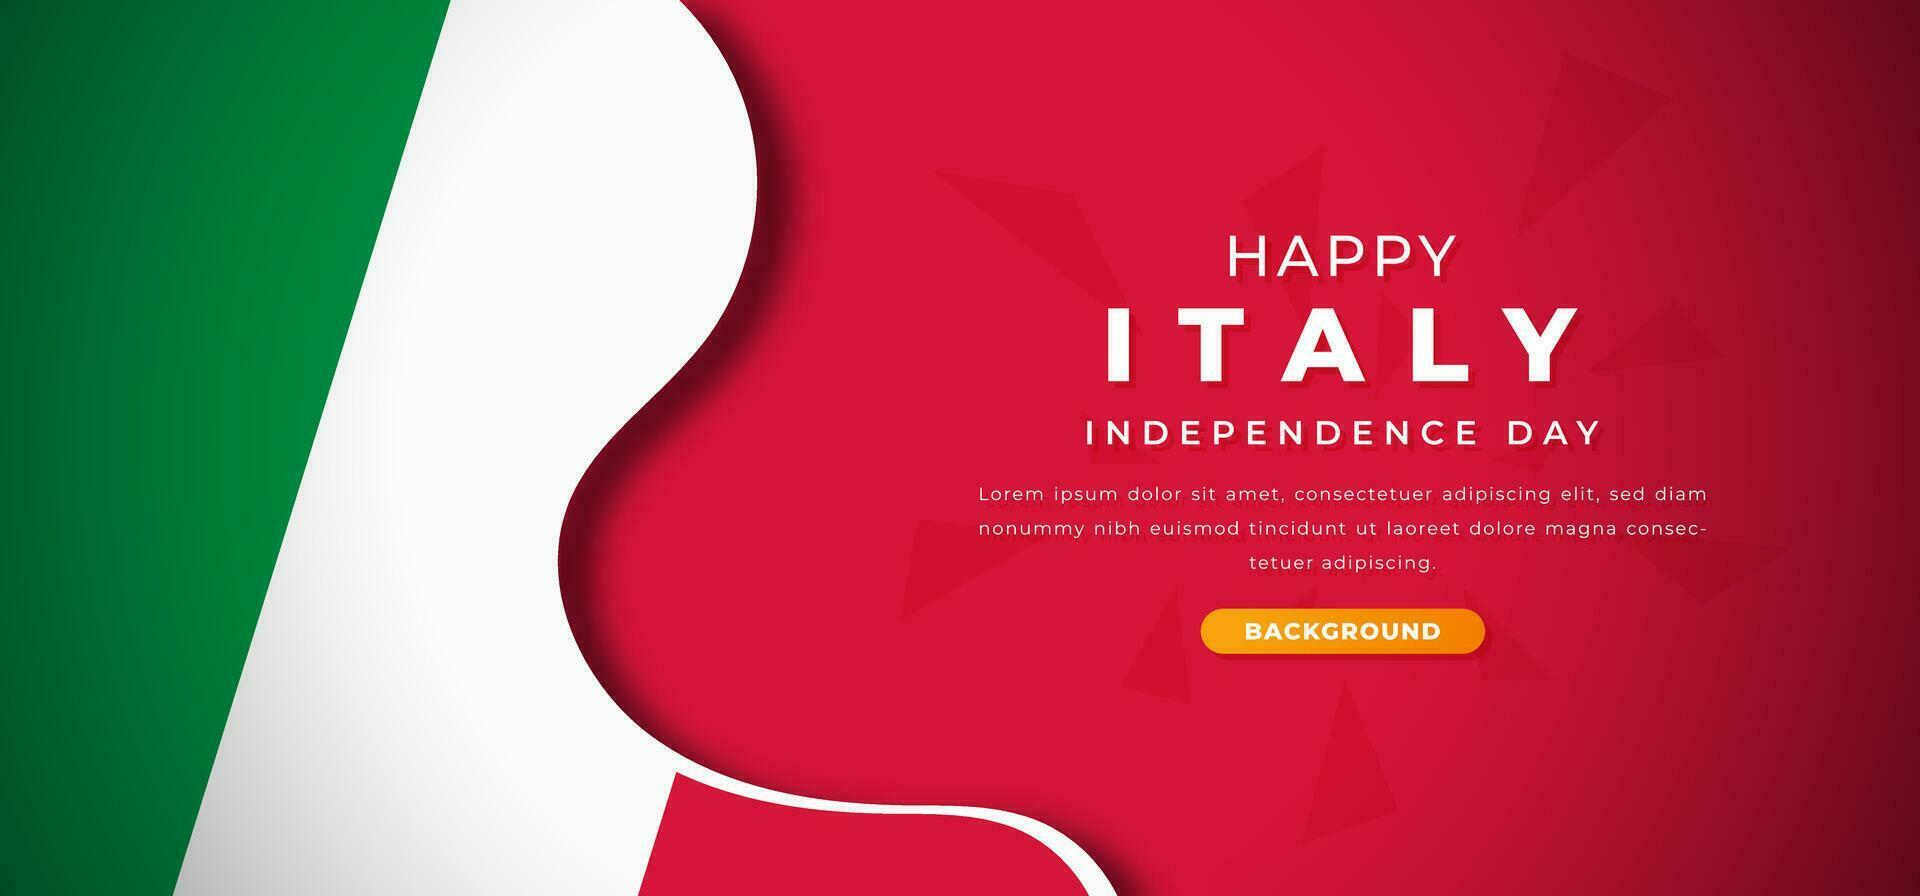 Happy Italy Independence Day Design Paper Cut Shapes Background Illustration for Poster, Banner, Advertising, Greeting Card vector